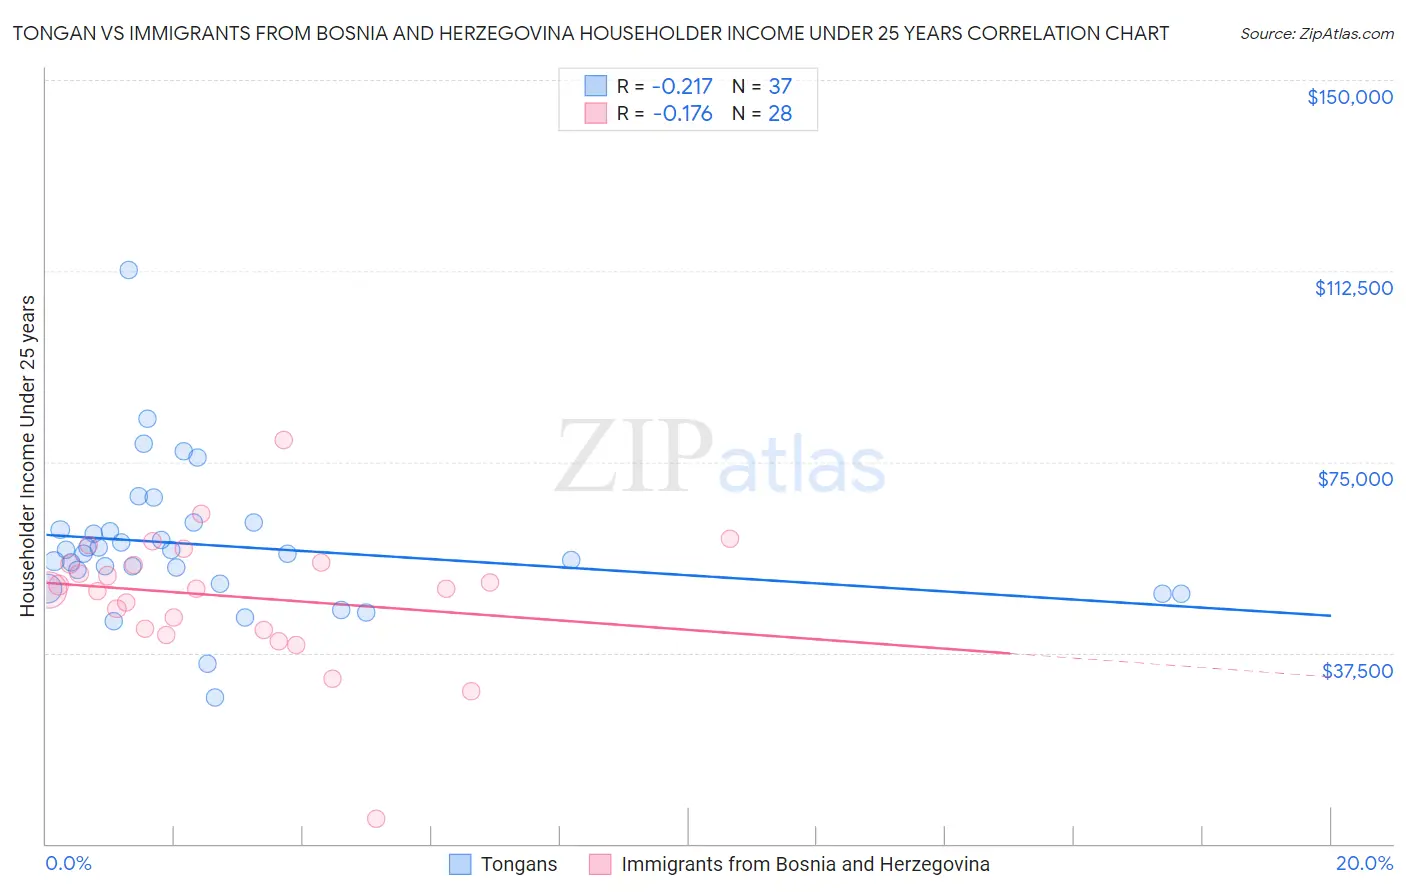 Tongan vs Immigrants from Bosnia and Herzegovina Householder Income Under 25 years